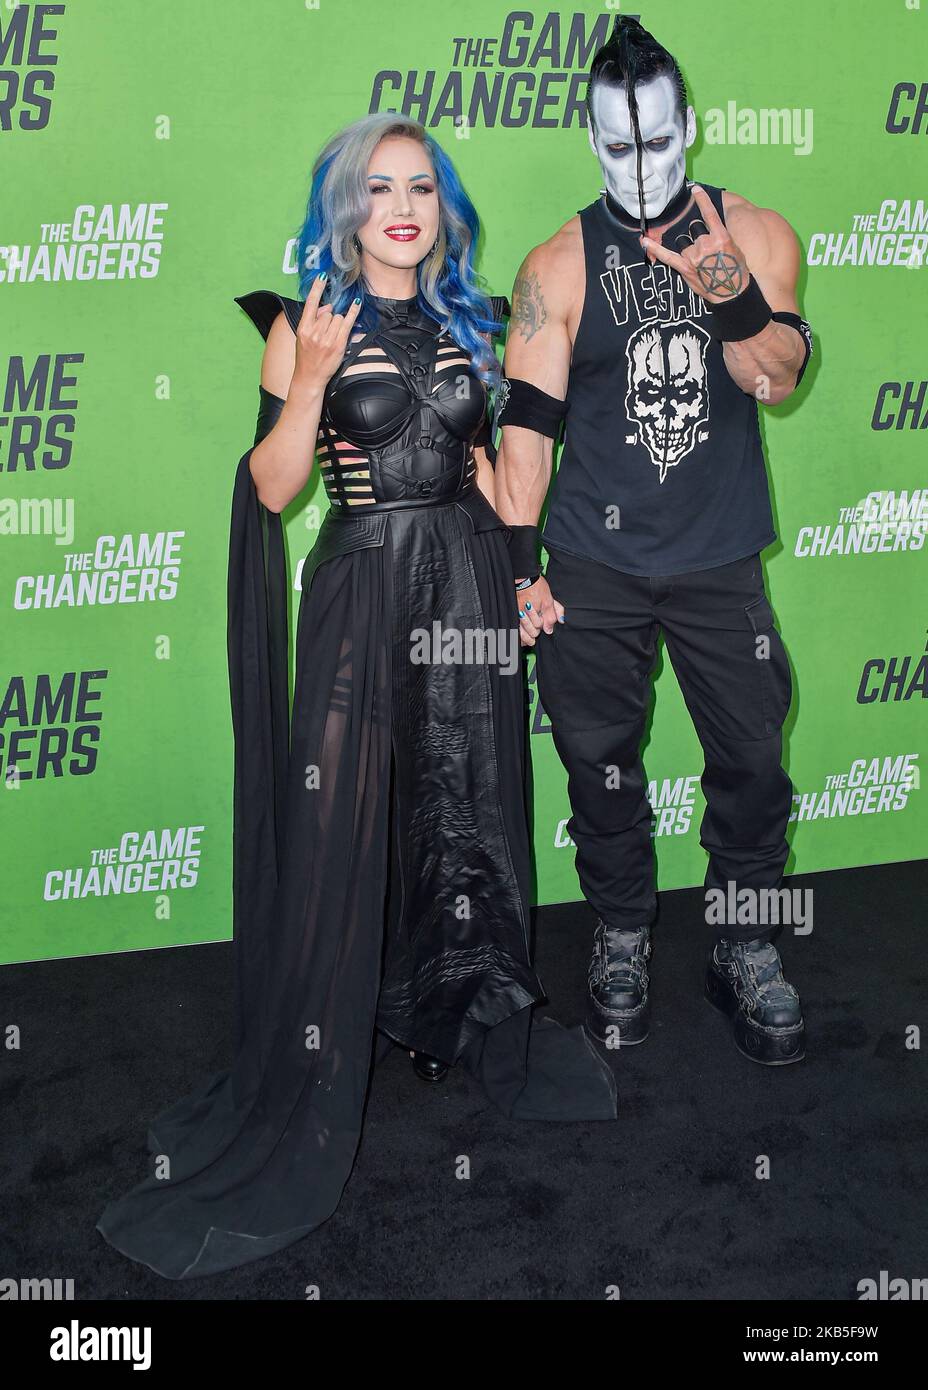 HOLLYWOOD, LOS ANGELES, CALIFORNIA, USA - SEPTEMBER 05: Alissa White-Gluz and Doyle Wolfgang von Frankenstein arrive at the Los Angeles Premiere Of 'The Game Changers' held at ArcLight Cinemas Hollywood on September 5, 2019 in Hollywood, Los Angeles, California, United States. (Photo by Image Press Agency/NurPhoto) Stock Photo